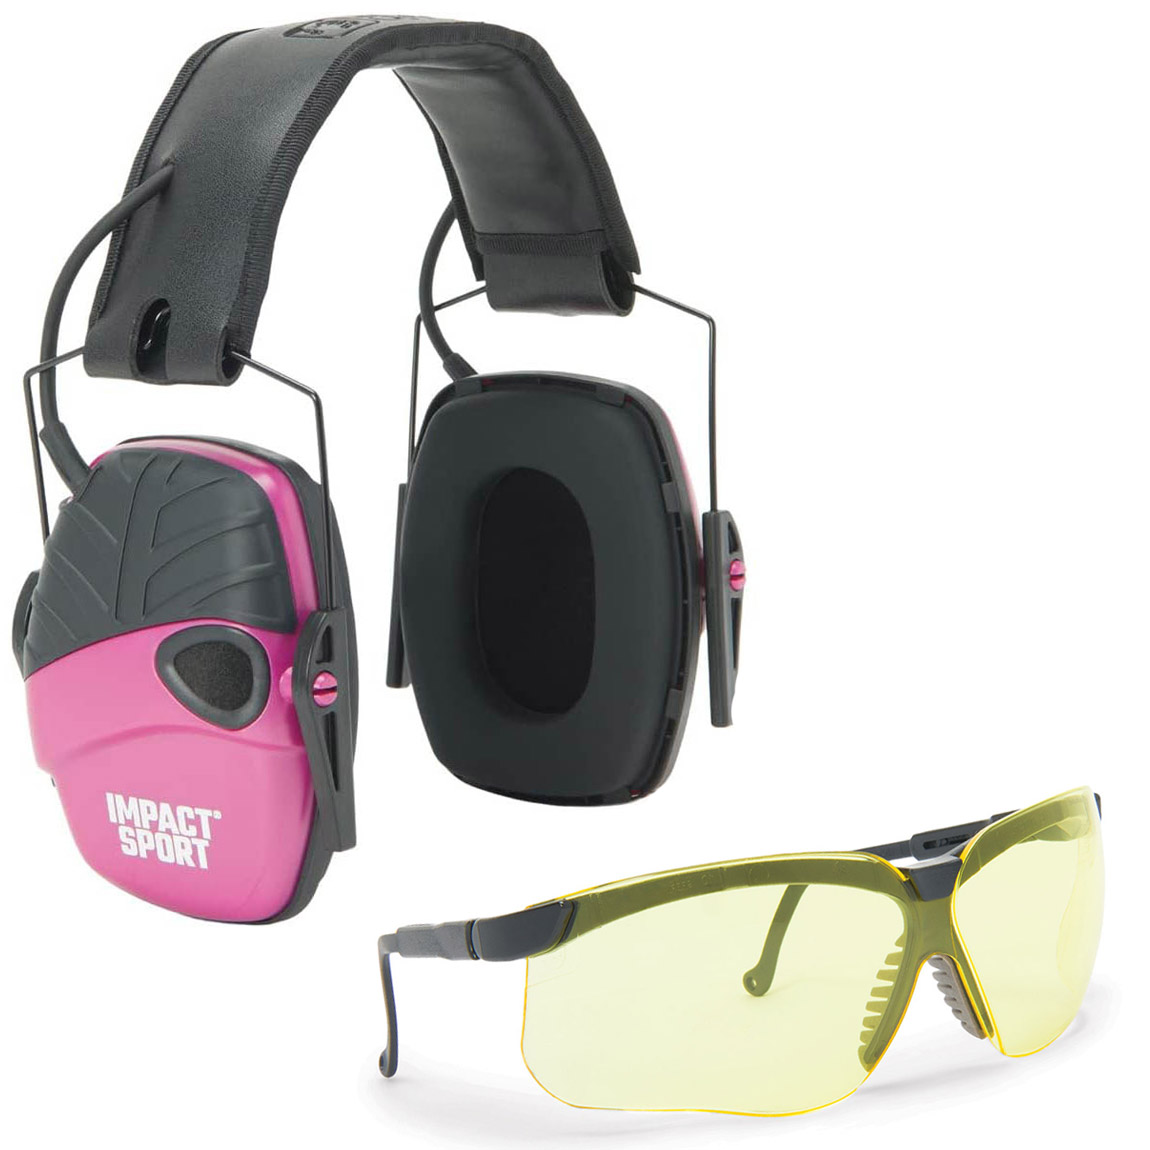 Howard Leight Women's Earmuffs and Genesis Safety Glasses: Protect Your Hearing and Vision in Style